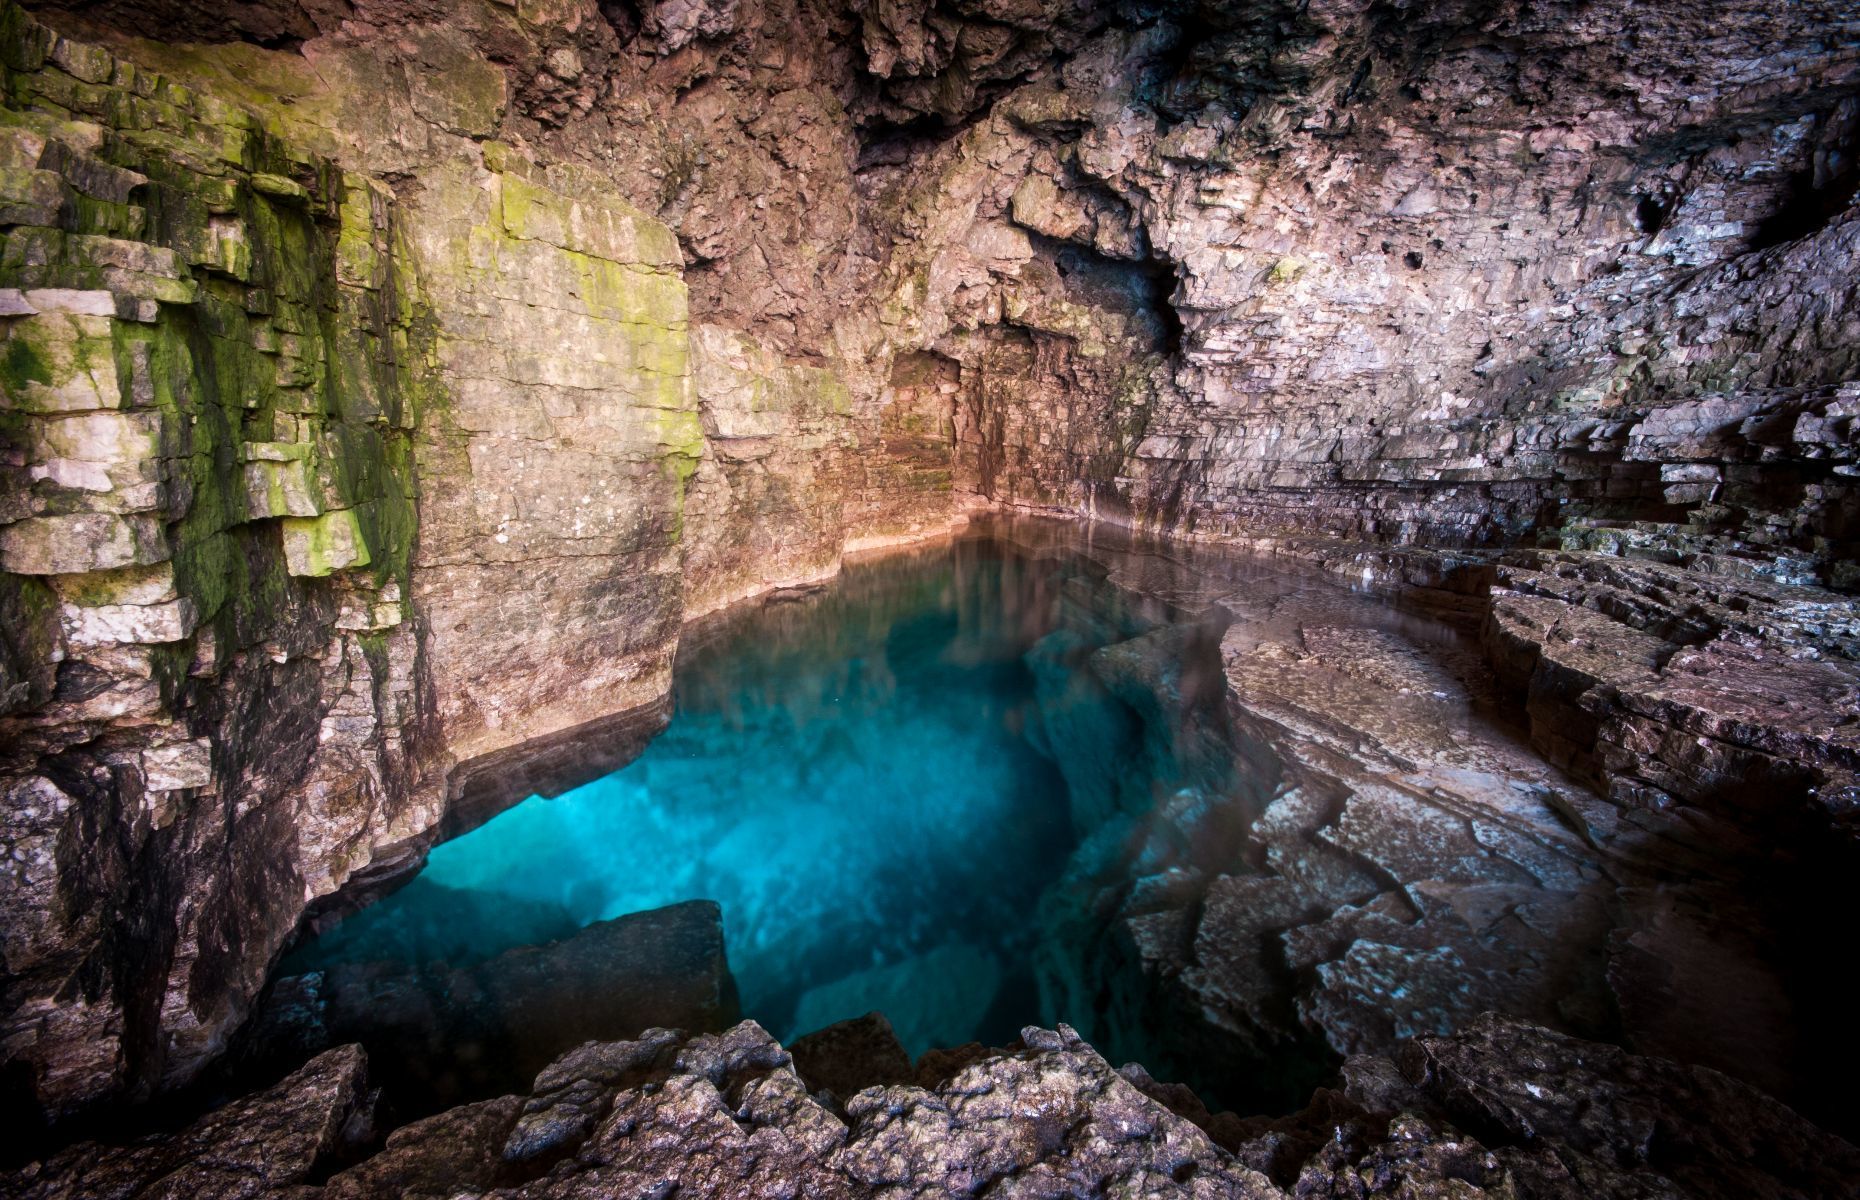 <p>With its tall cliffs and teal-blue waters, Bruce Peninsula National Park is unlike any other place in Ontario—or Canada, for that matter. One of the area’s most popular attractions is <a href="https://www.brucepeninsula.org/the-grotto" rel="noreferrer noopener">The Grotto</a>, a large sea cave on the Georgian Bay shoreline. The half-hour or so hike to the hidden spot is a treat in itself.</p>